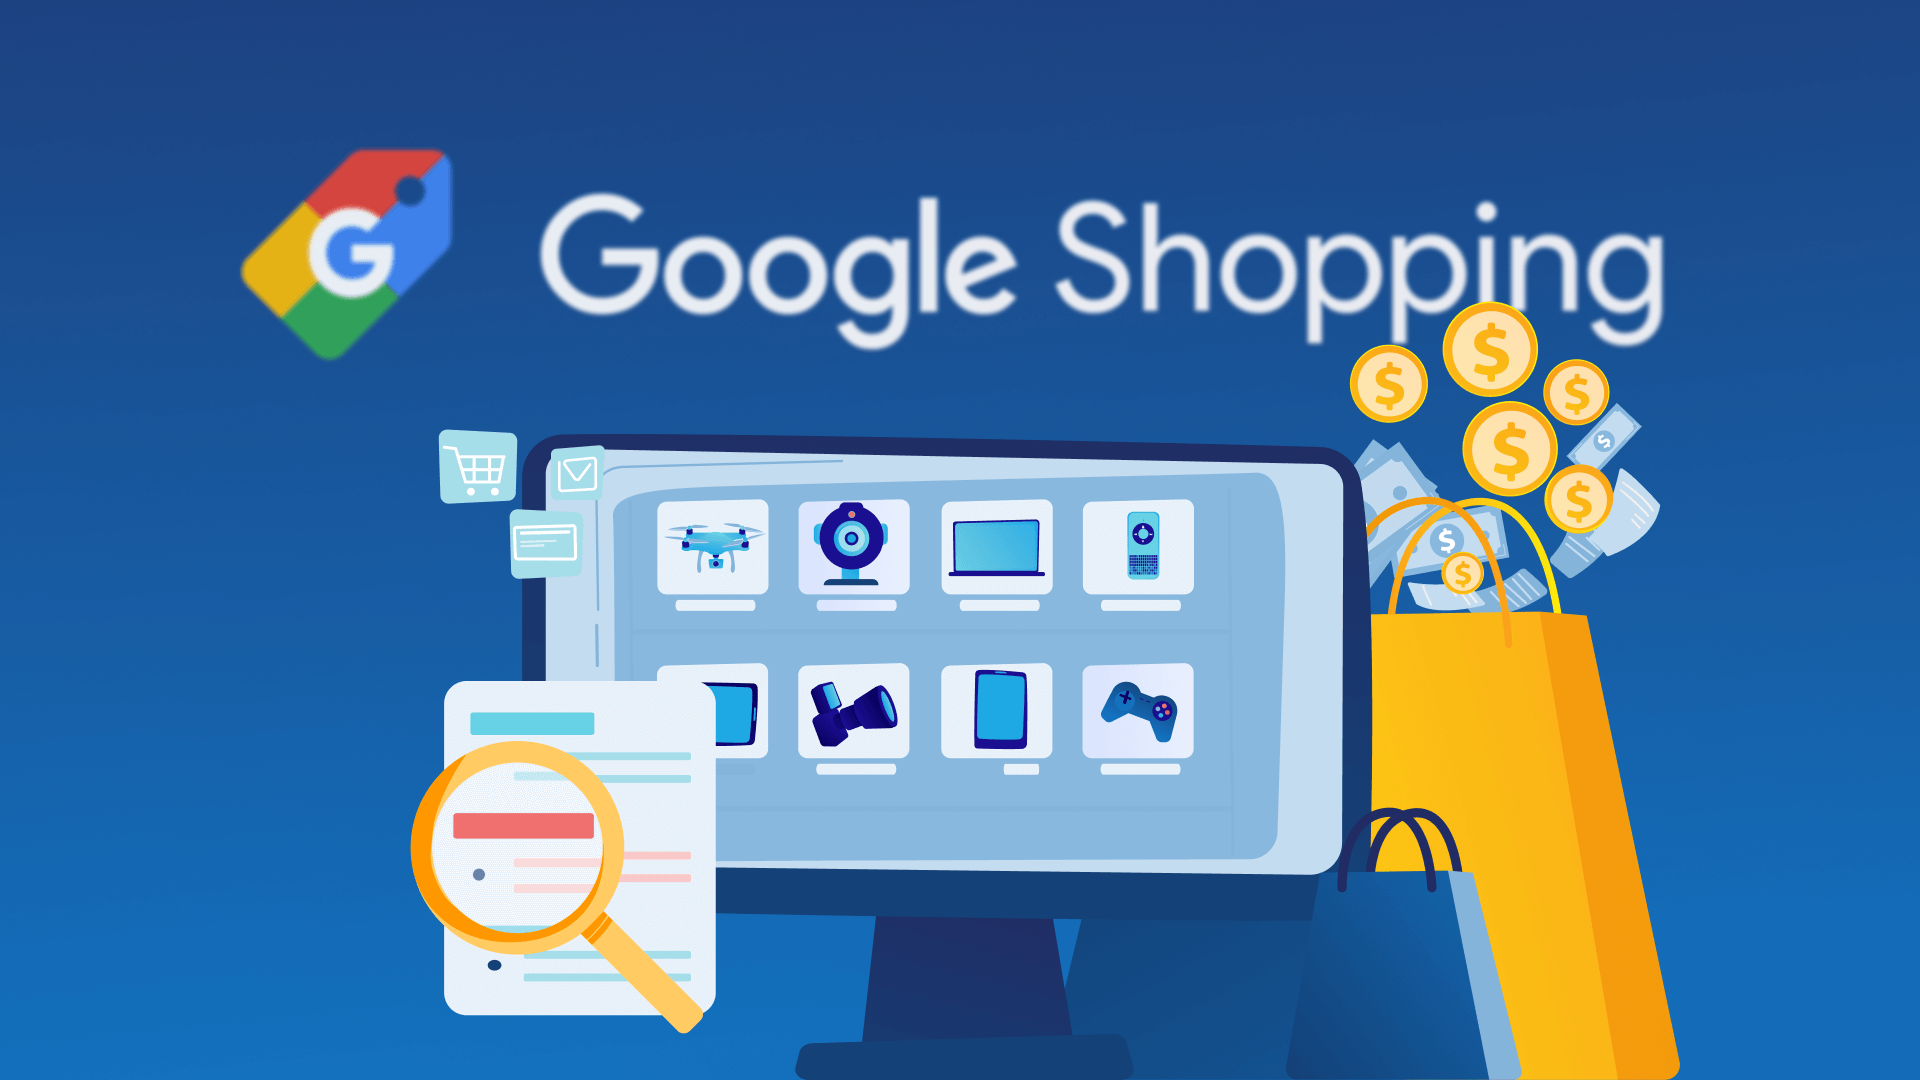 How to identify negative keywords for Google Shopping query sculpting in a scalable way